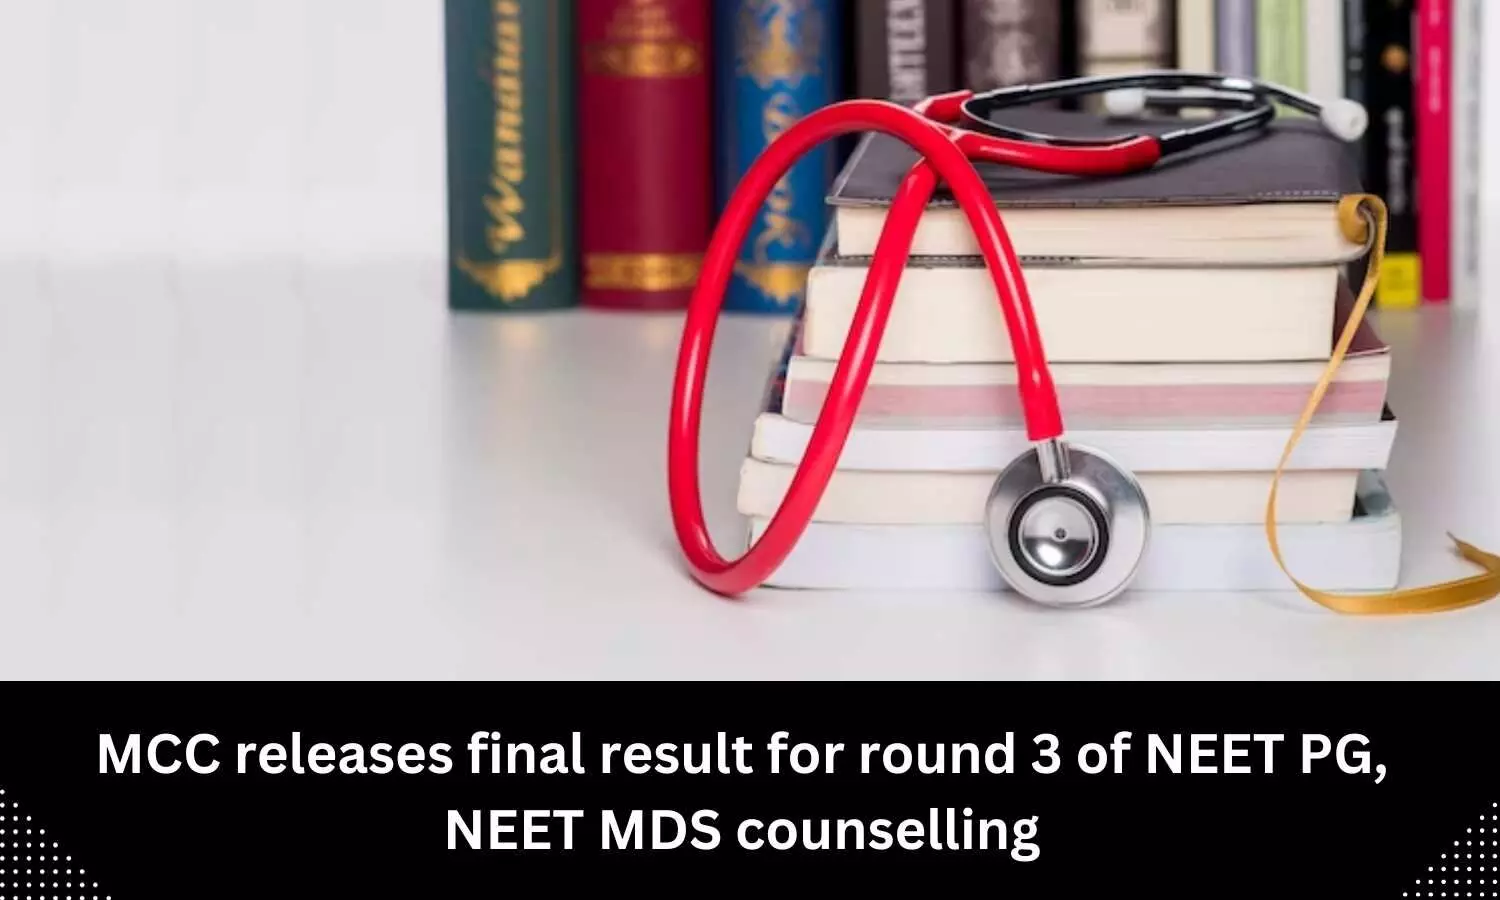 Final result for round 3 of NEET PG, NEET MDS counselling released by MCC